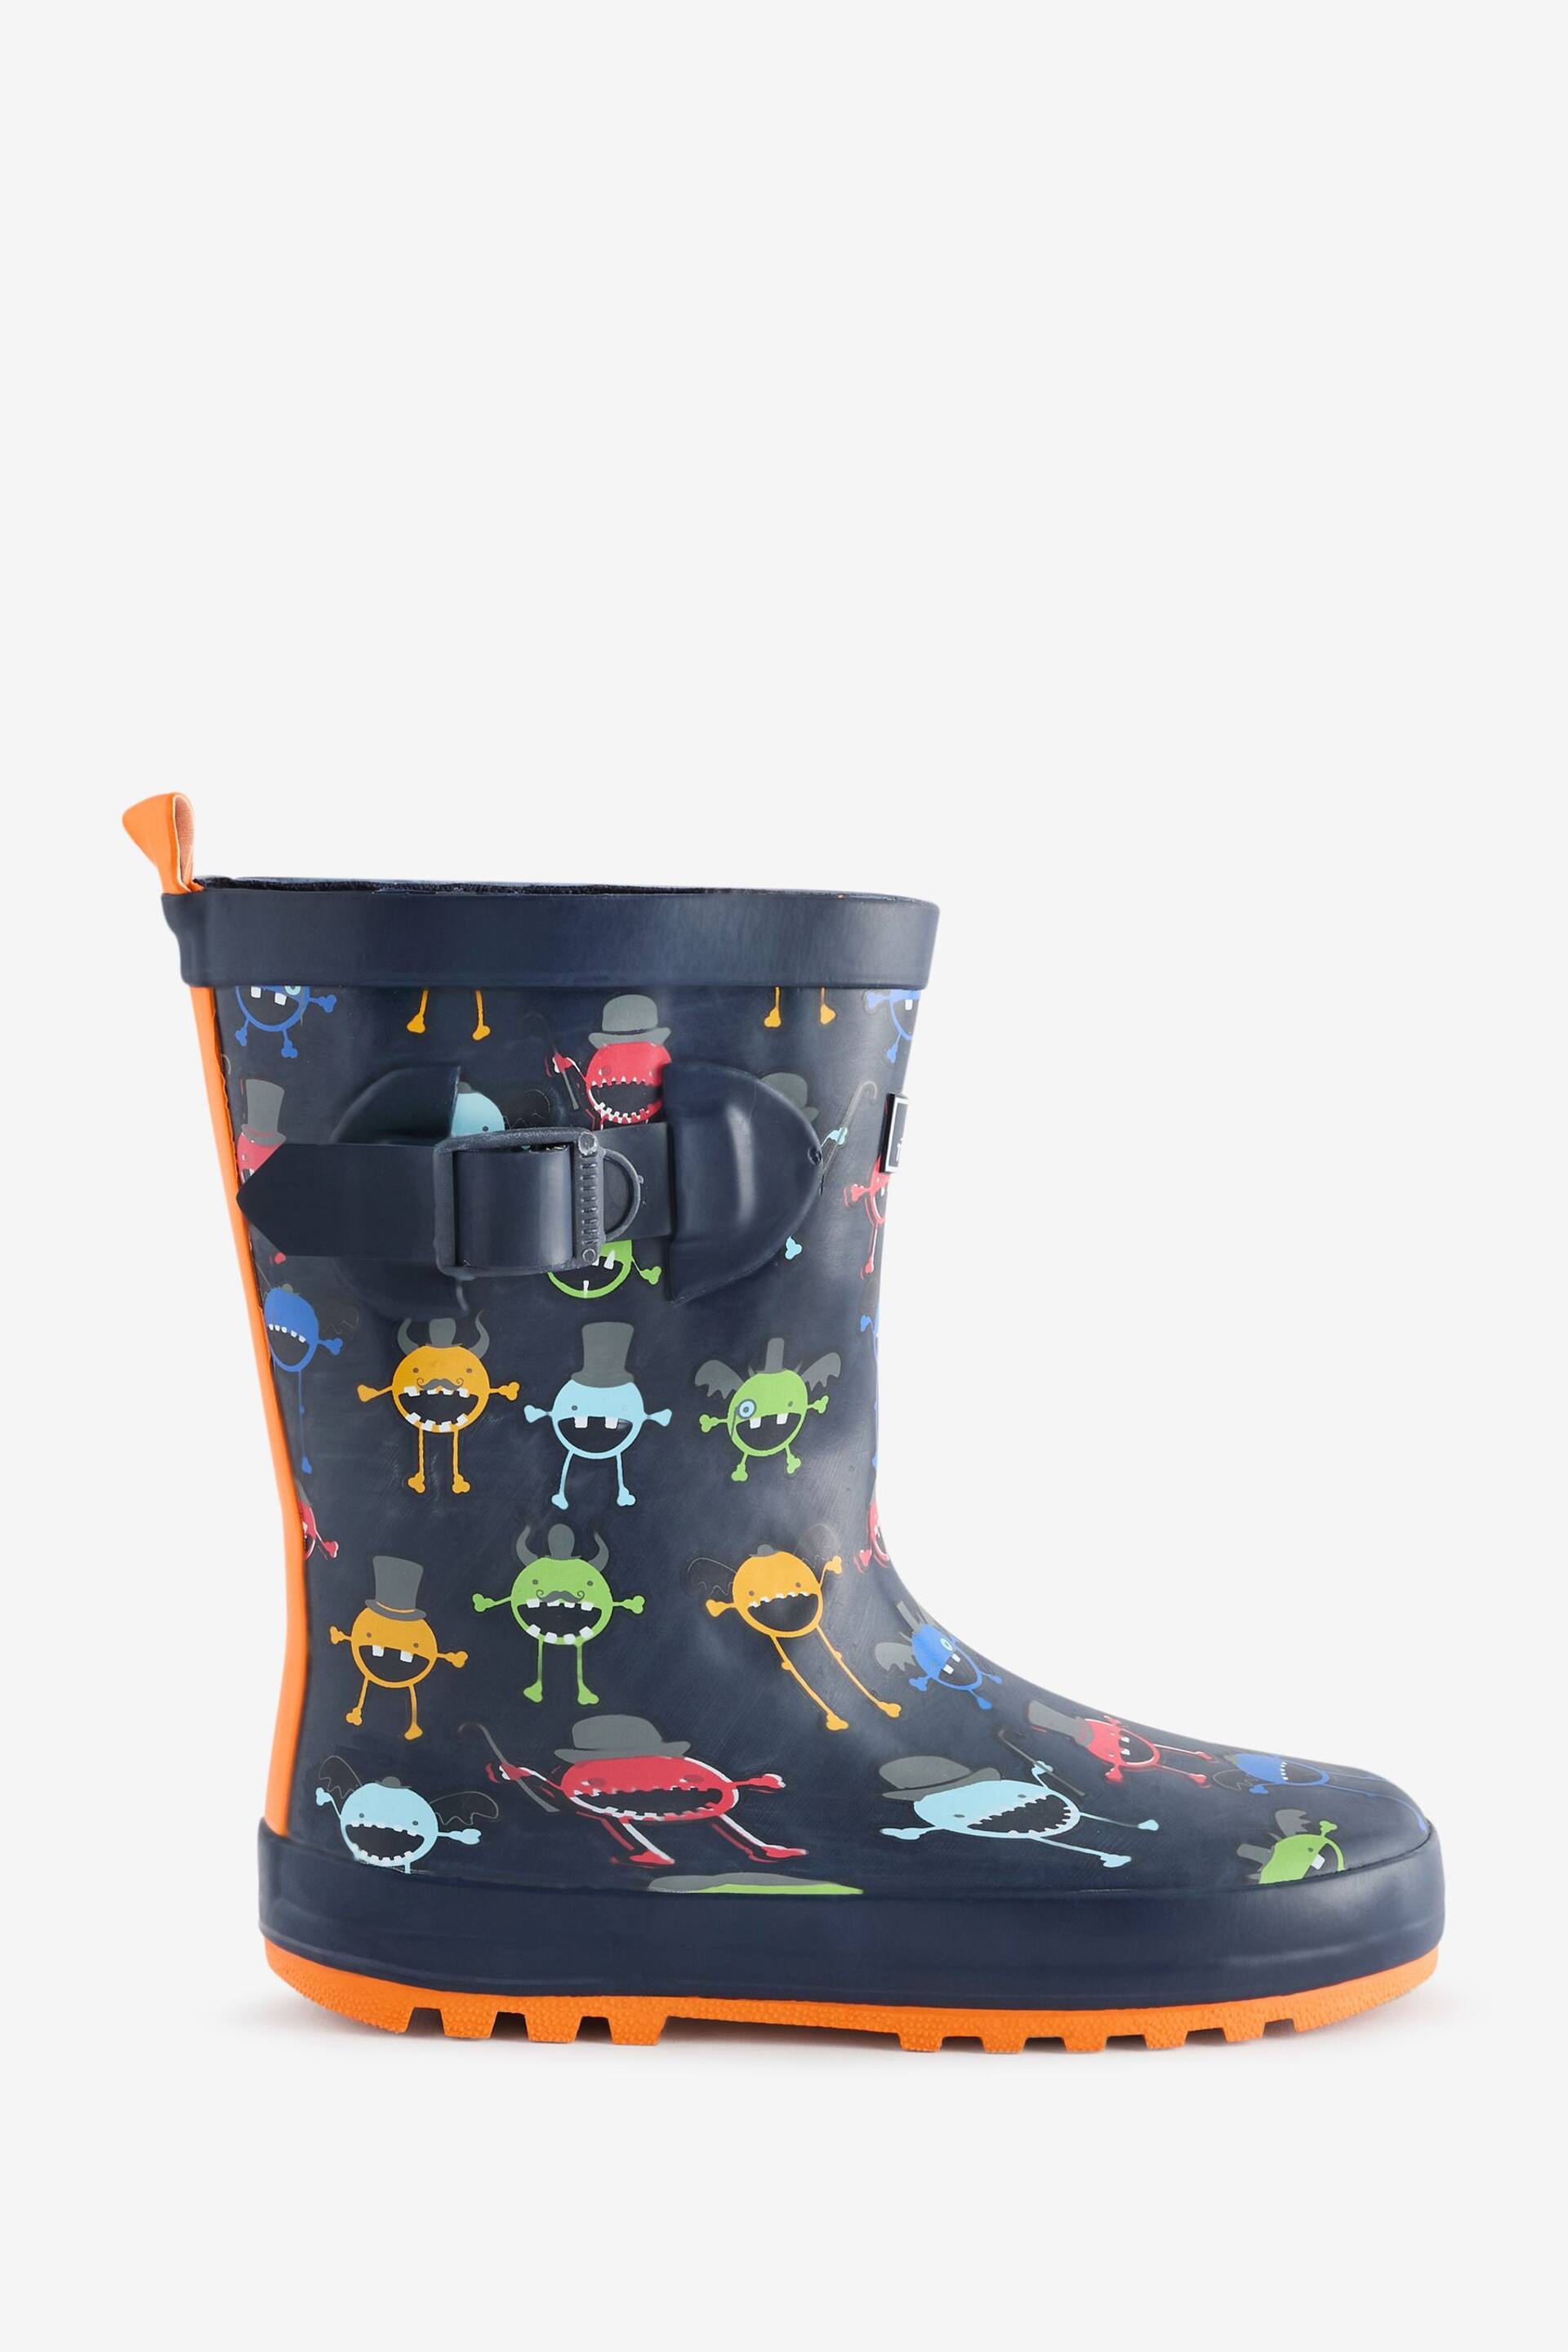 Trespass Kids Puddle Wellies - Image 4 of 6